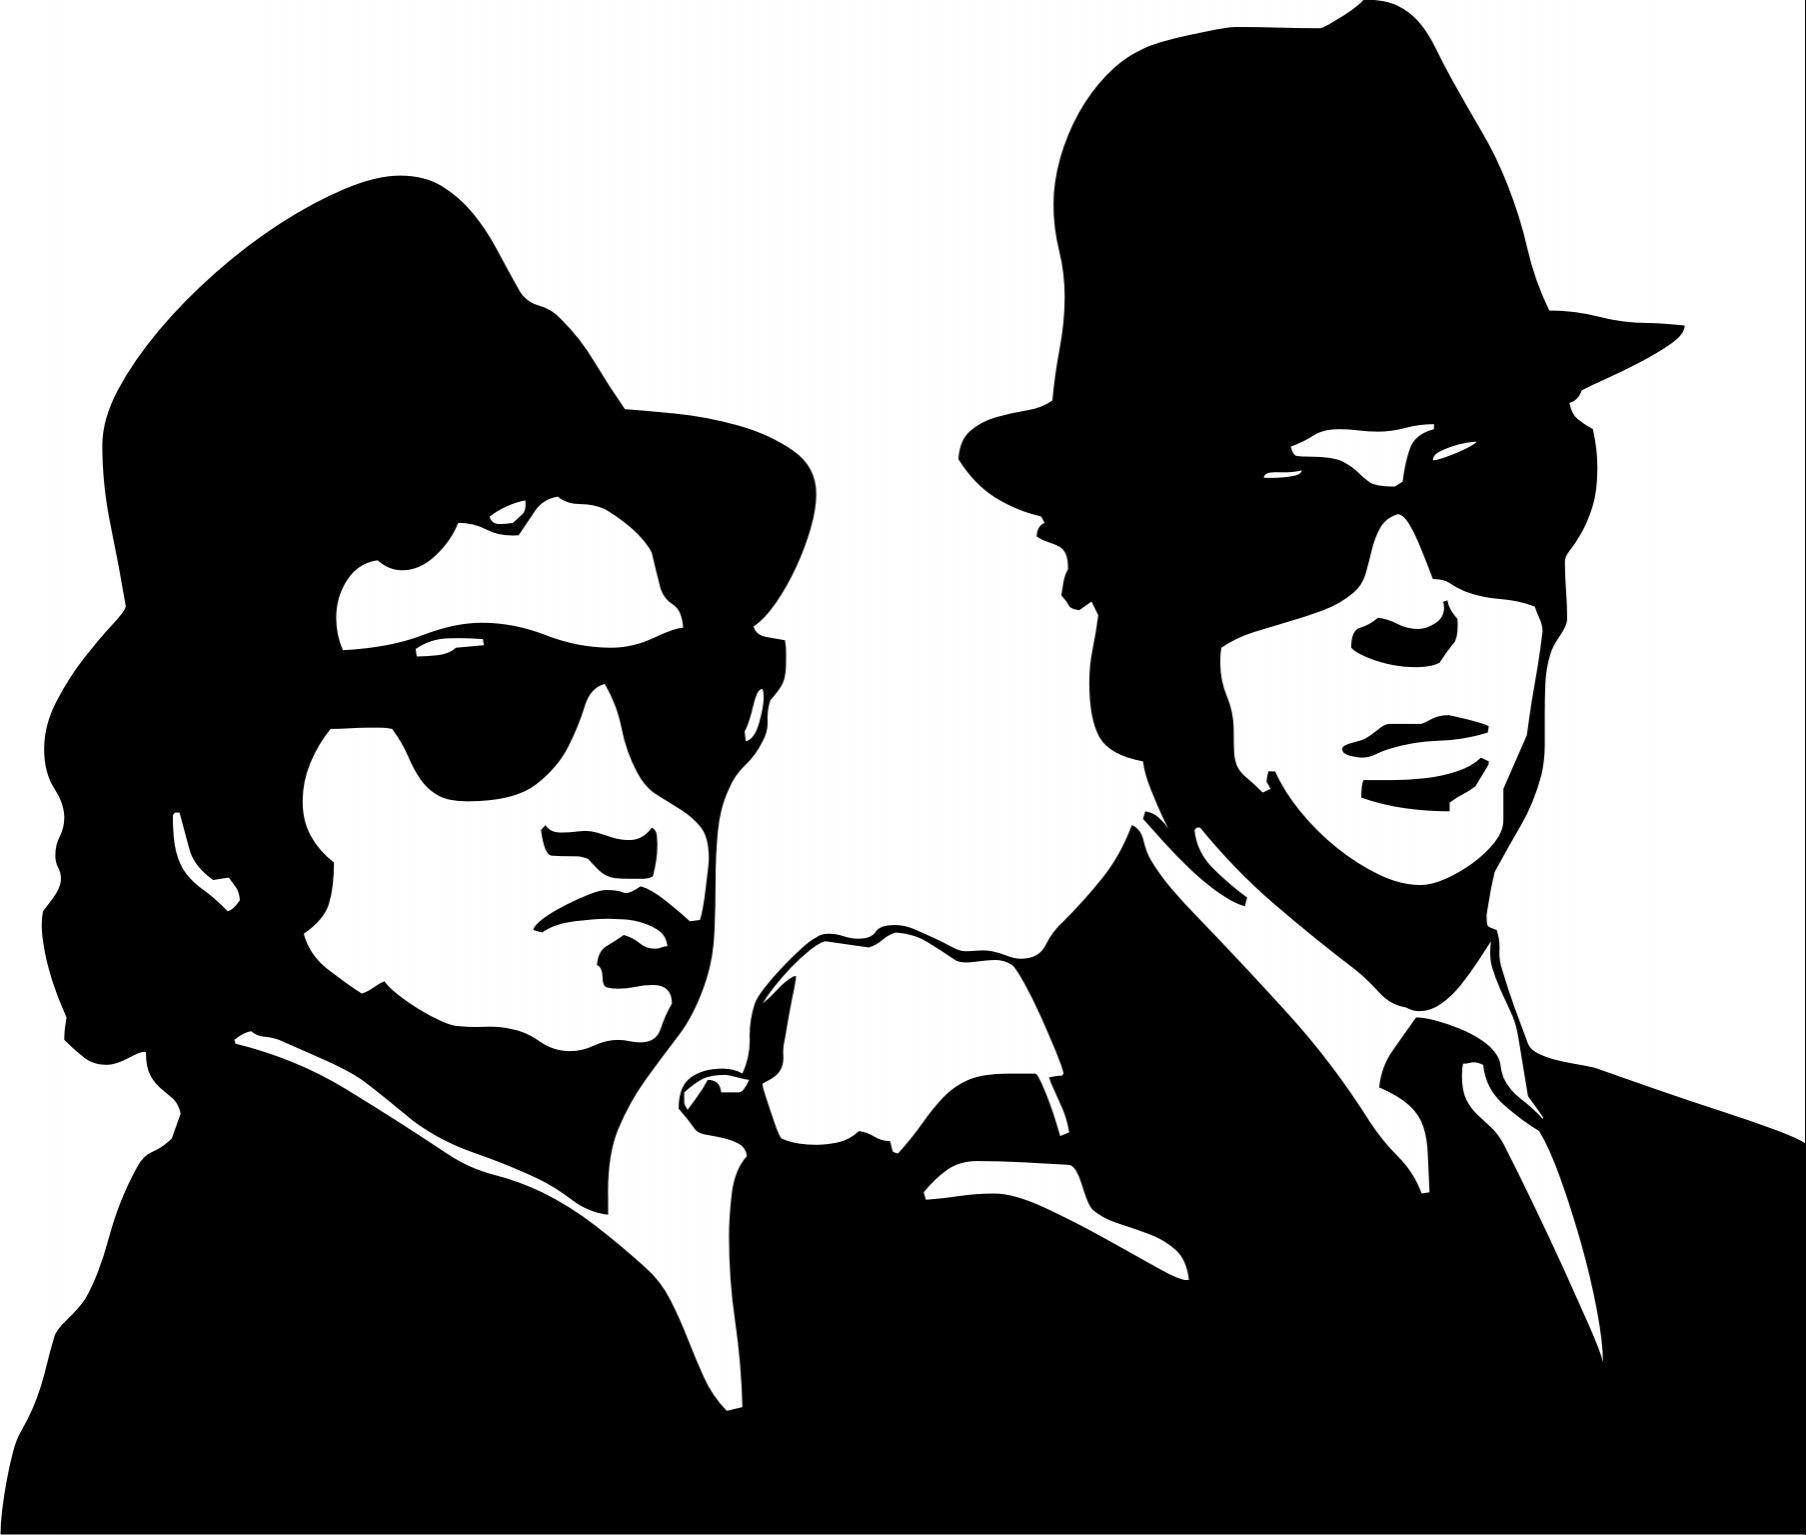 Blues brothers wallpaper. PC